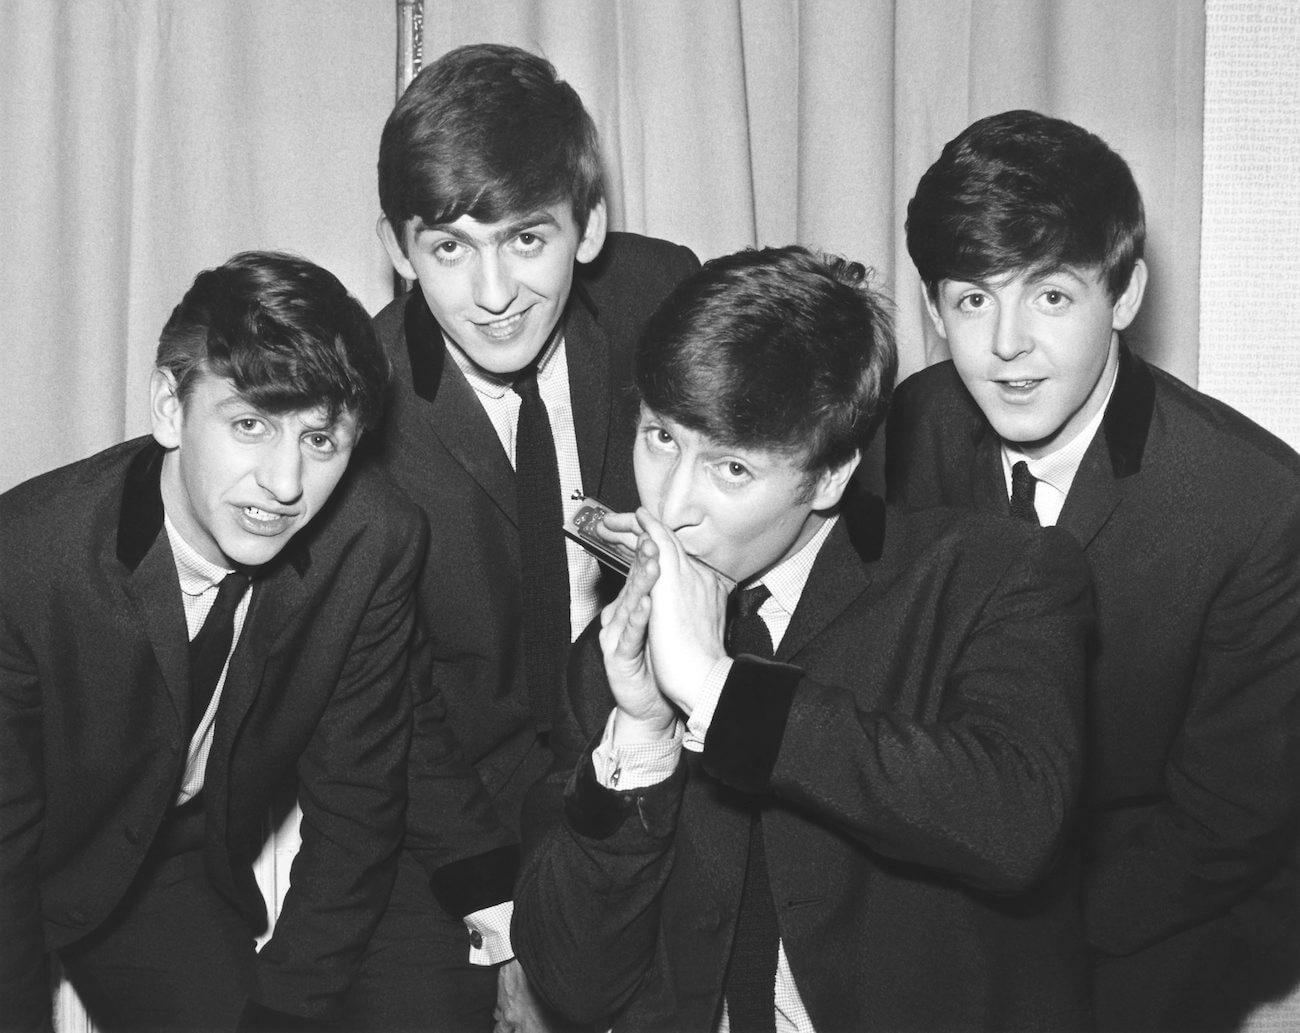 Paul McCartney and The Beatles in suits in 1962.